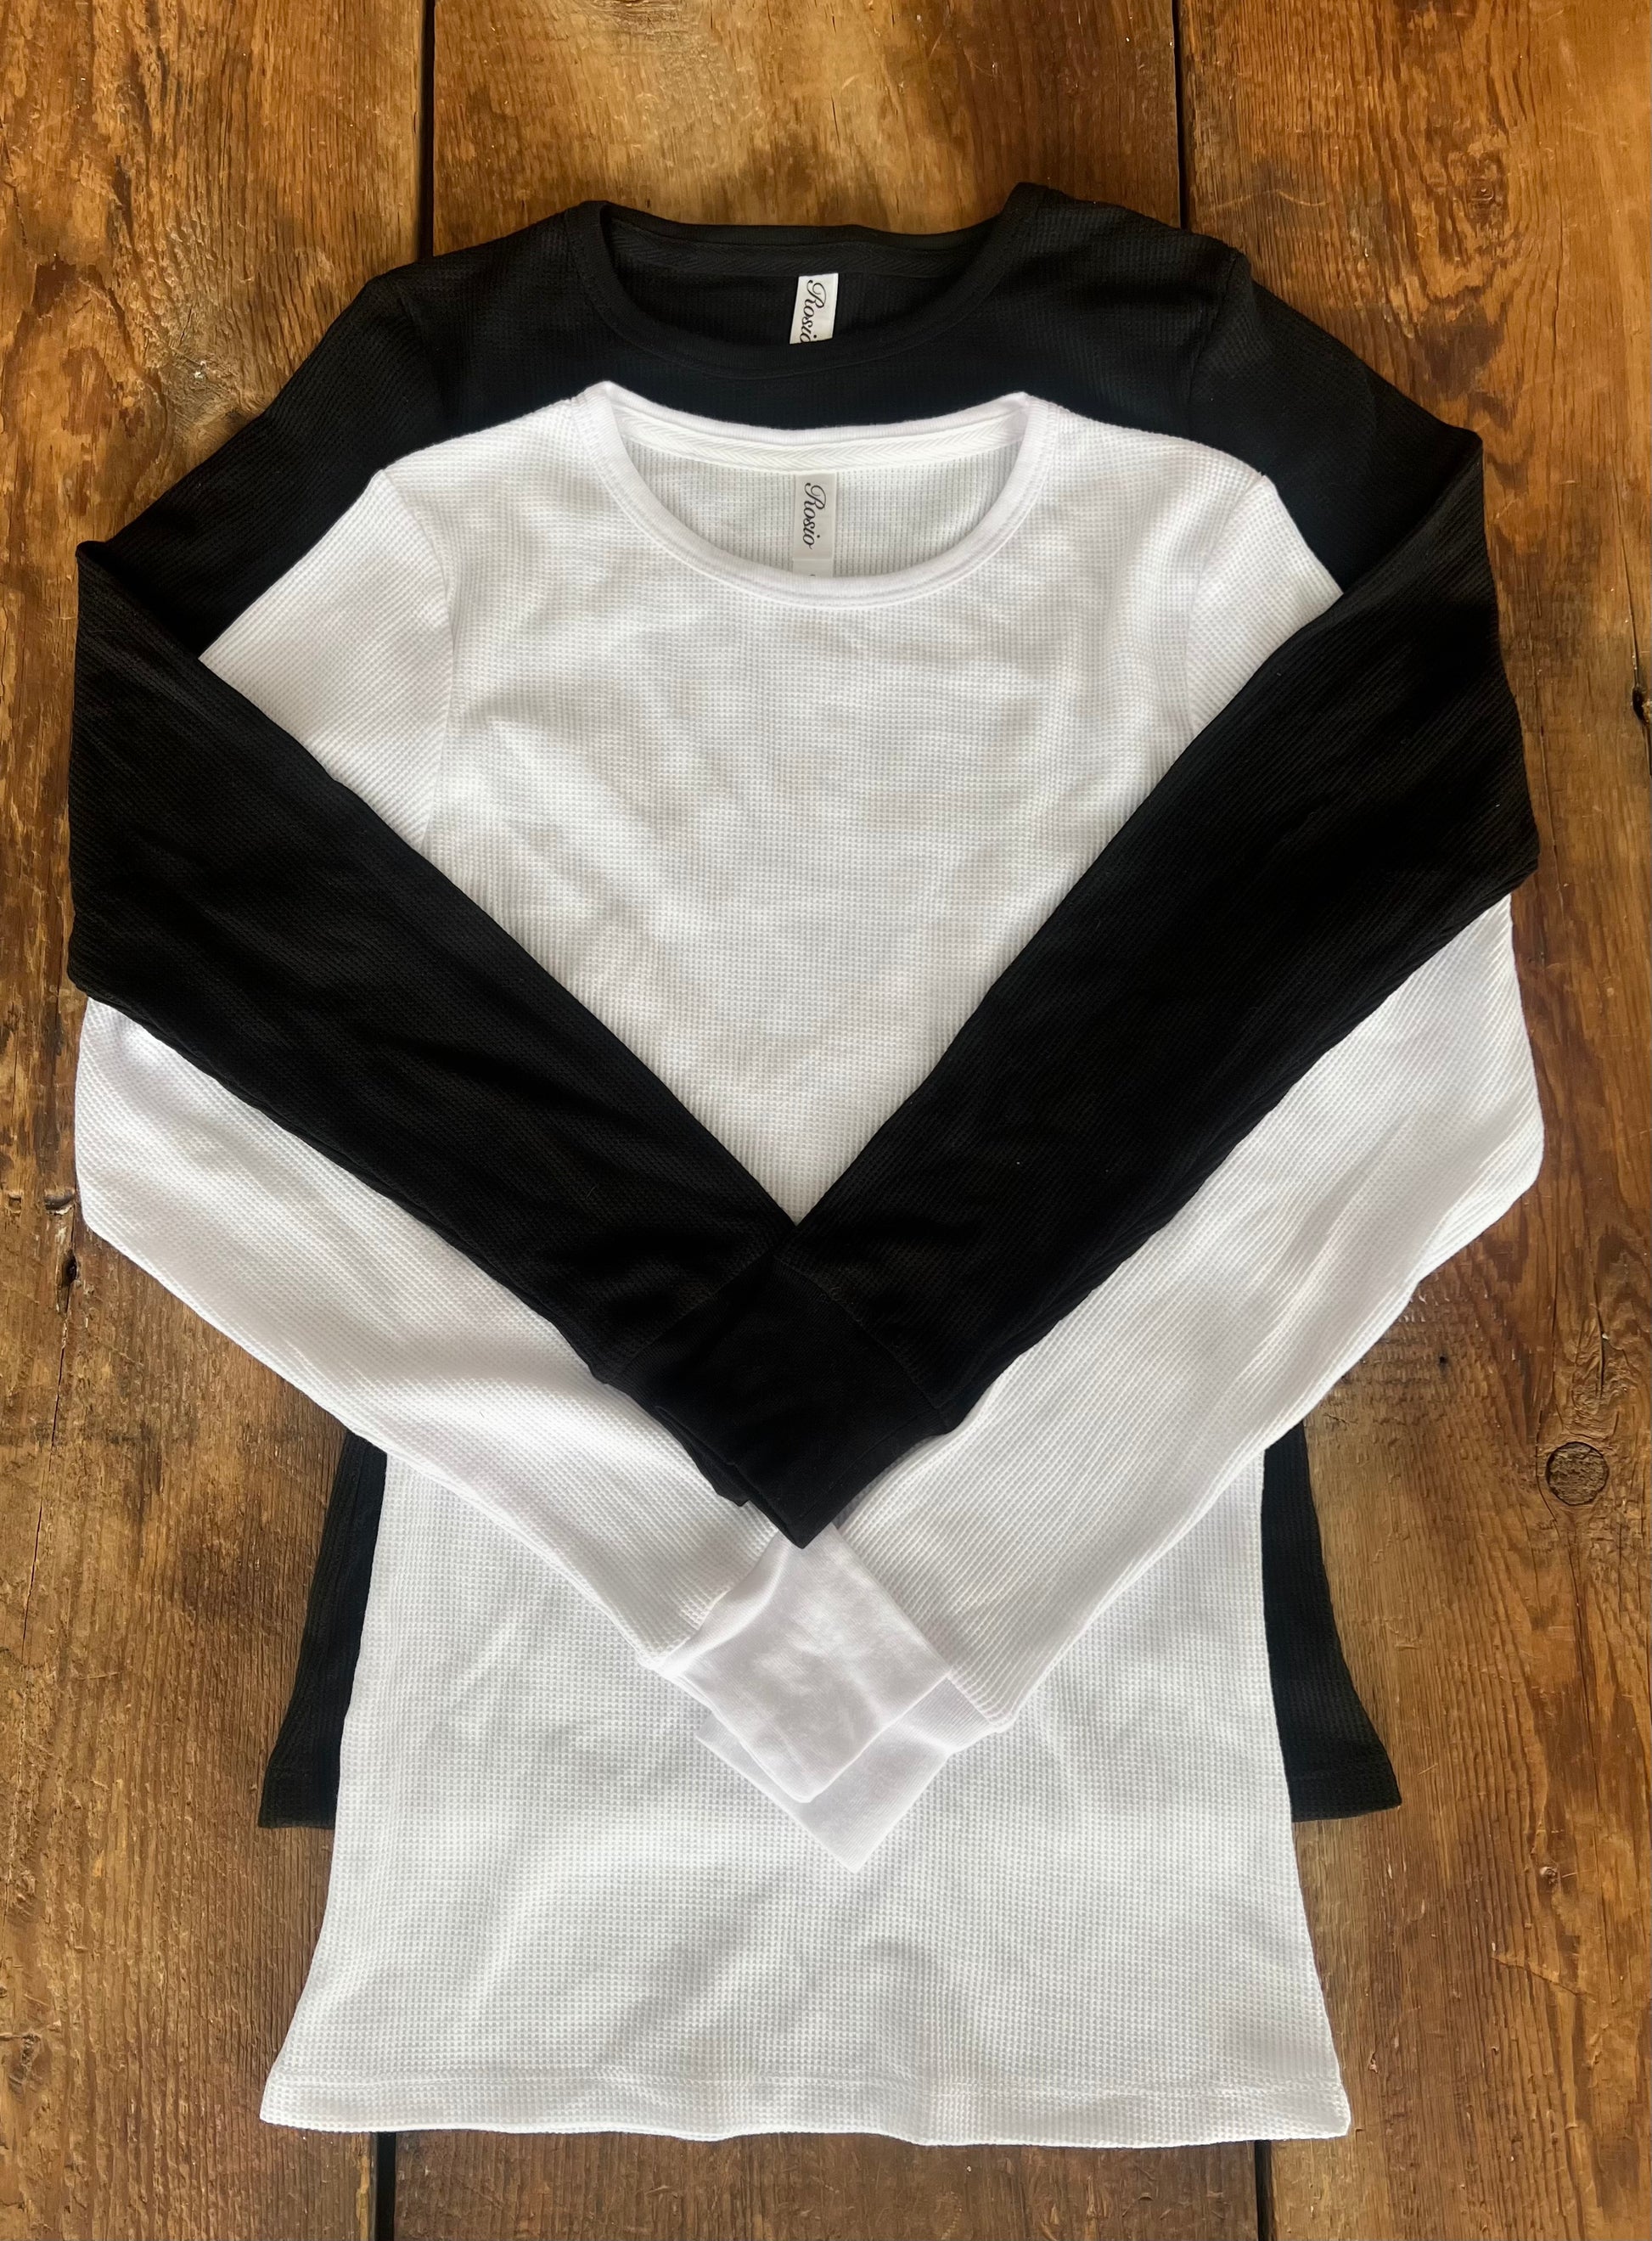 Black and White Thermal Tees